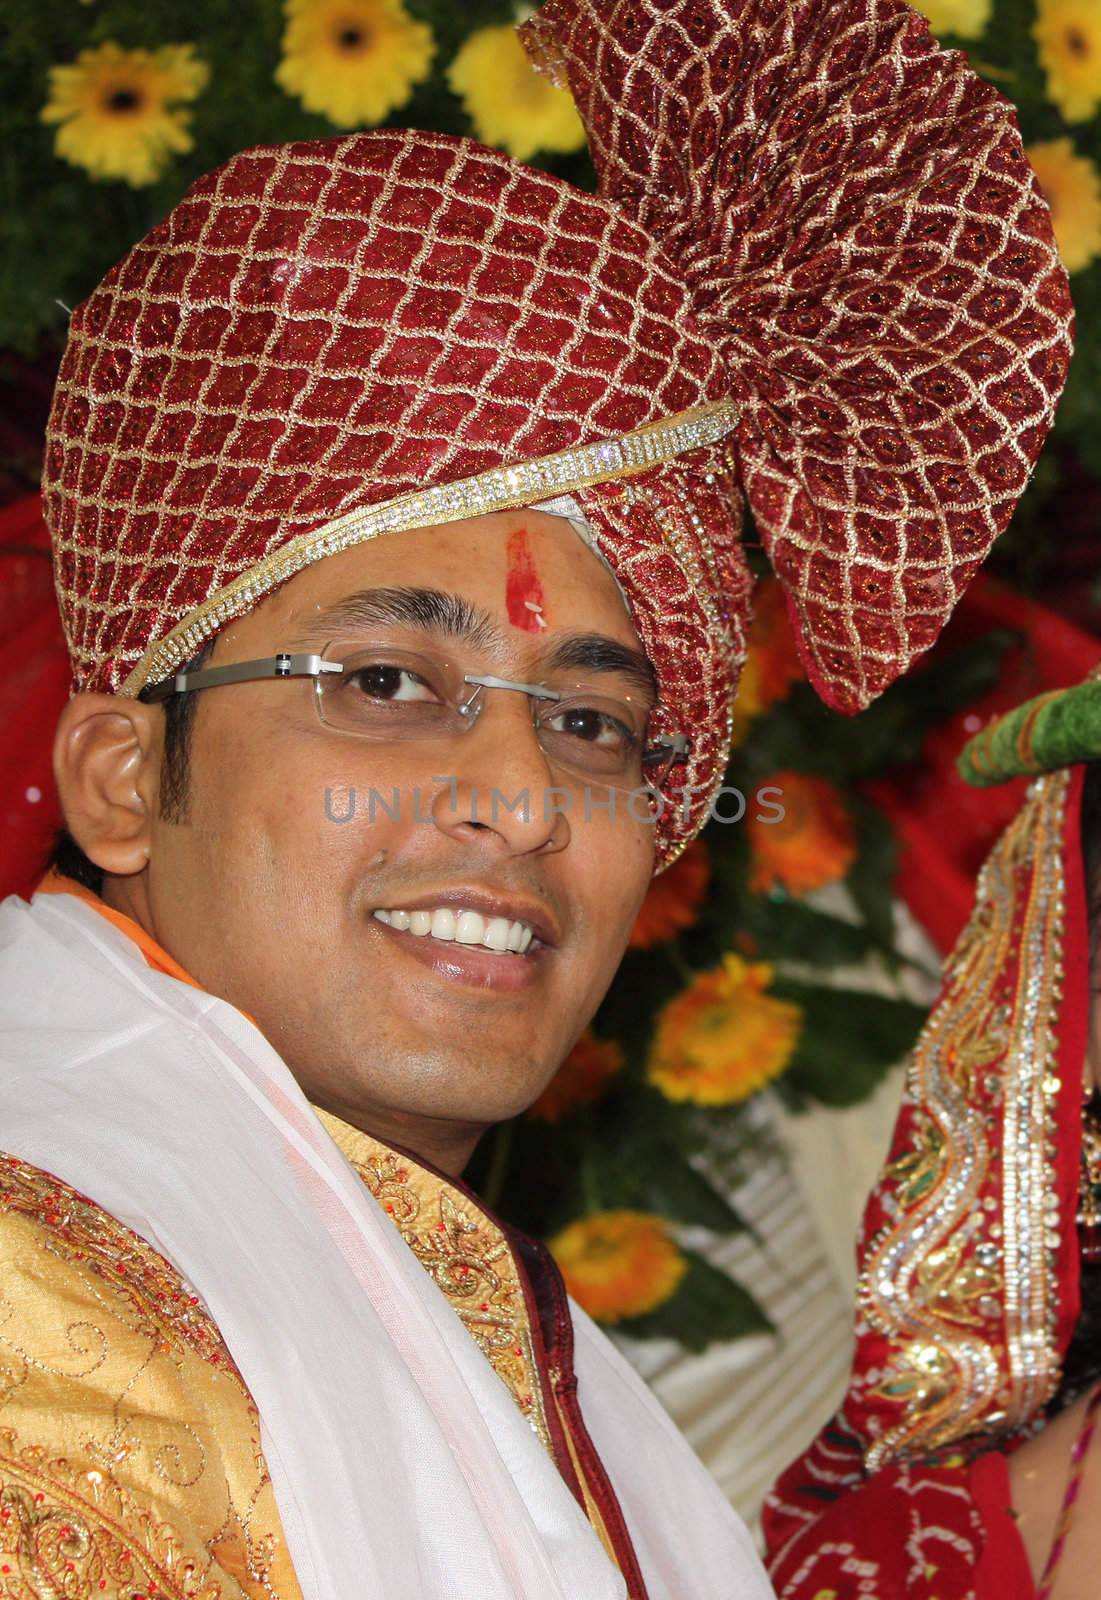 A portrait of a traditional Indian groom.